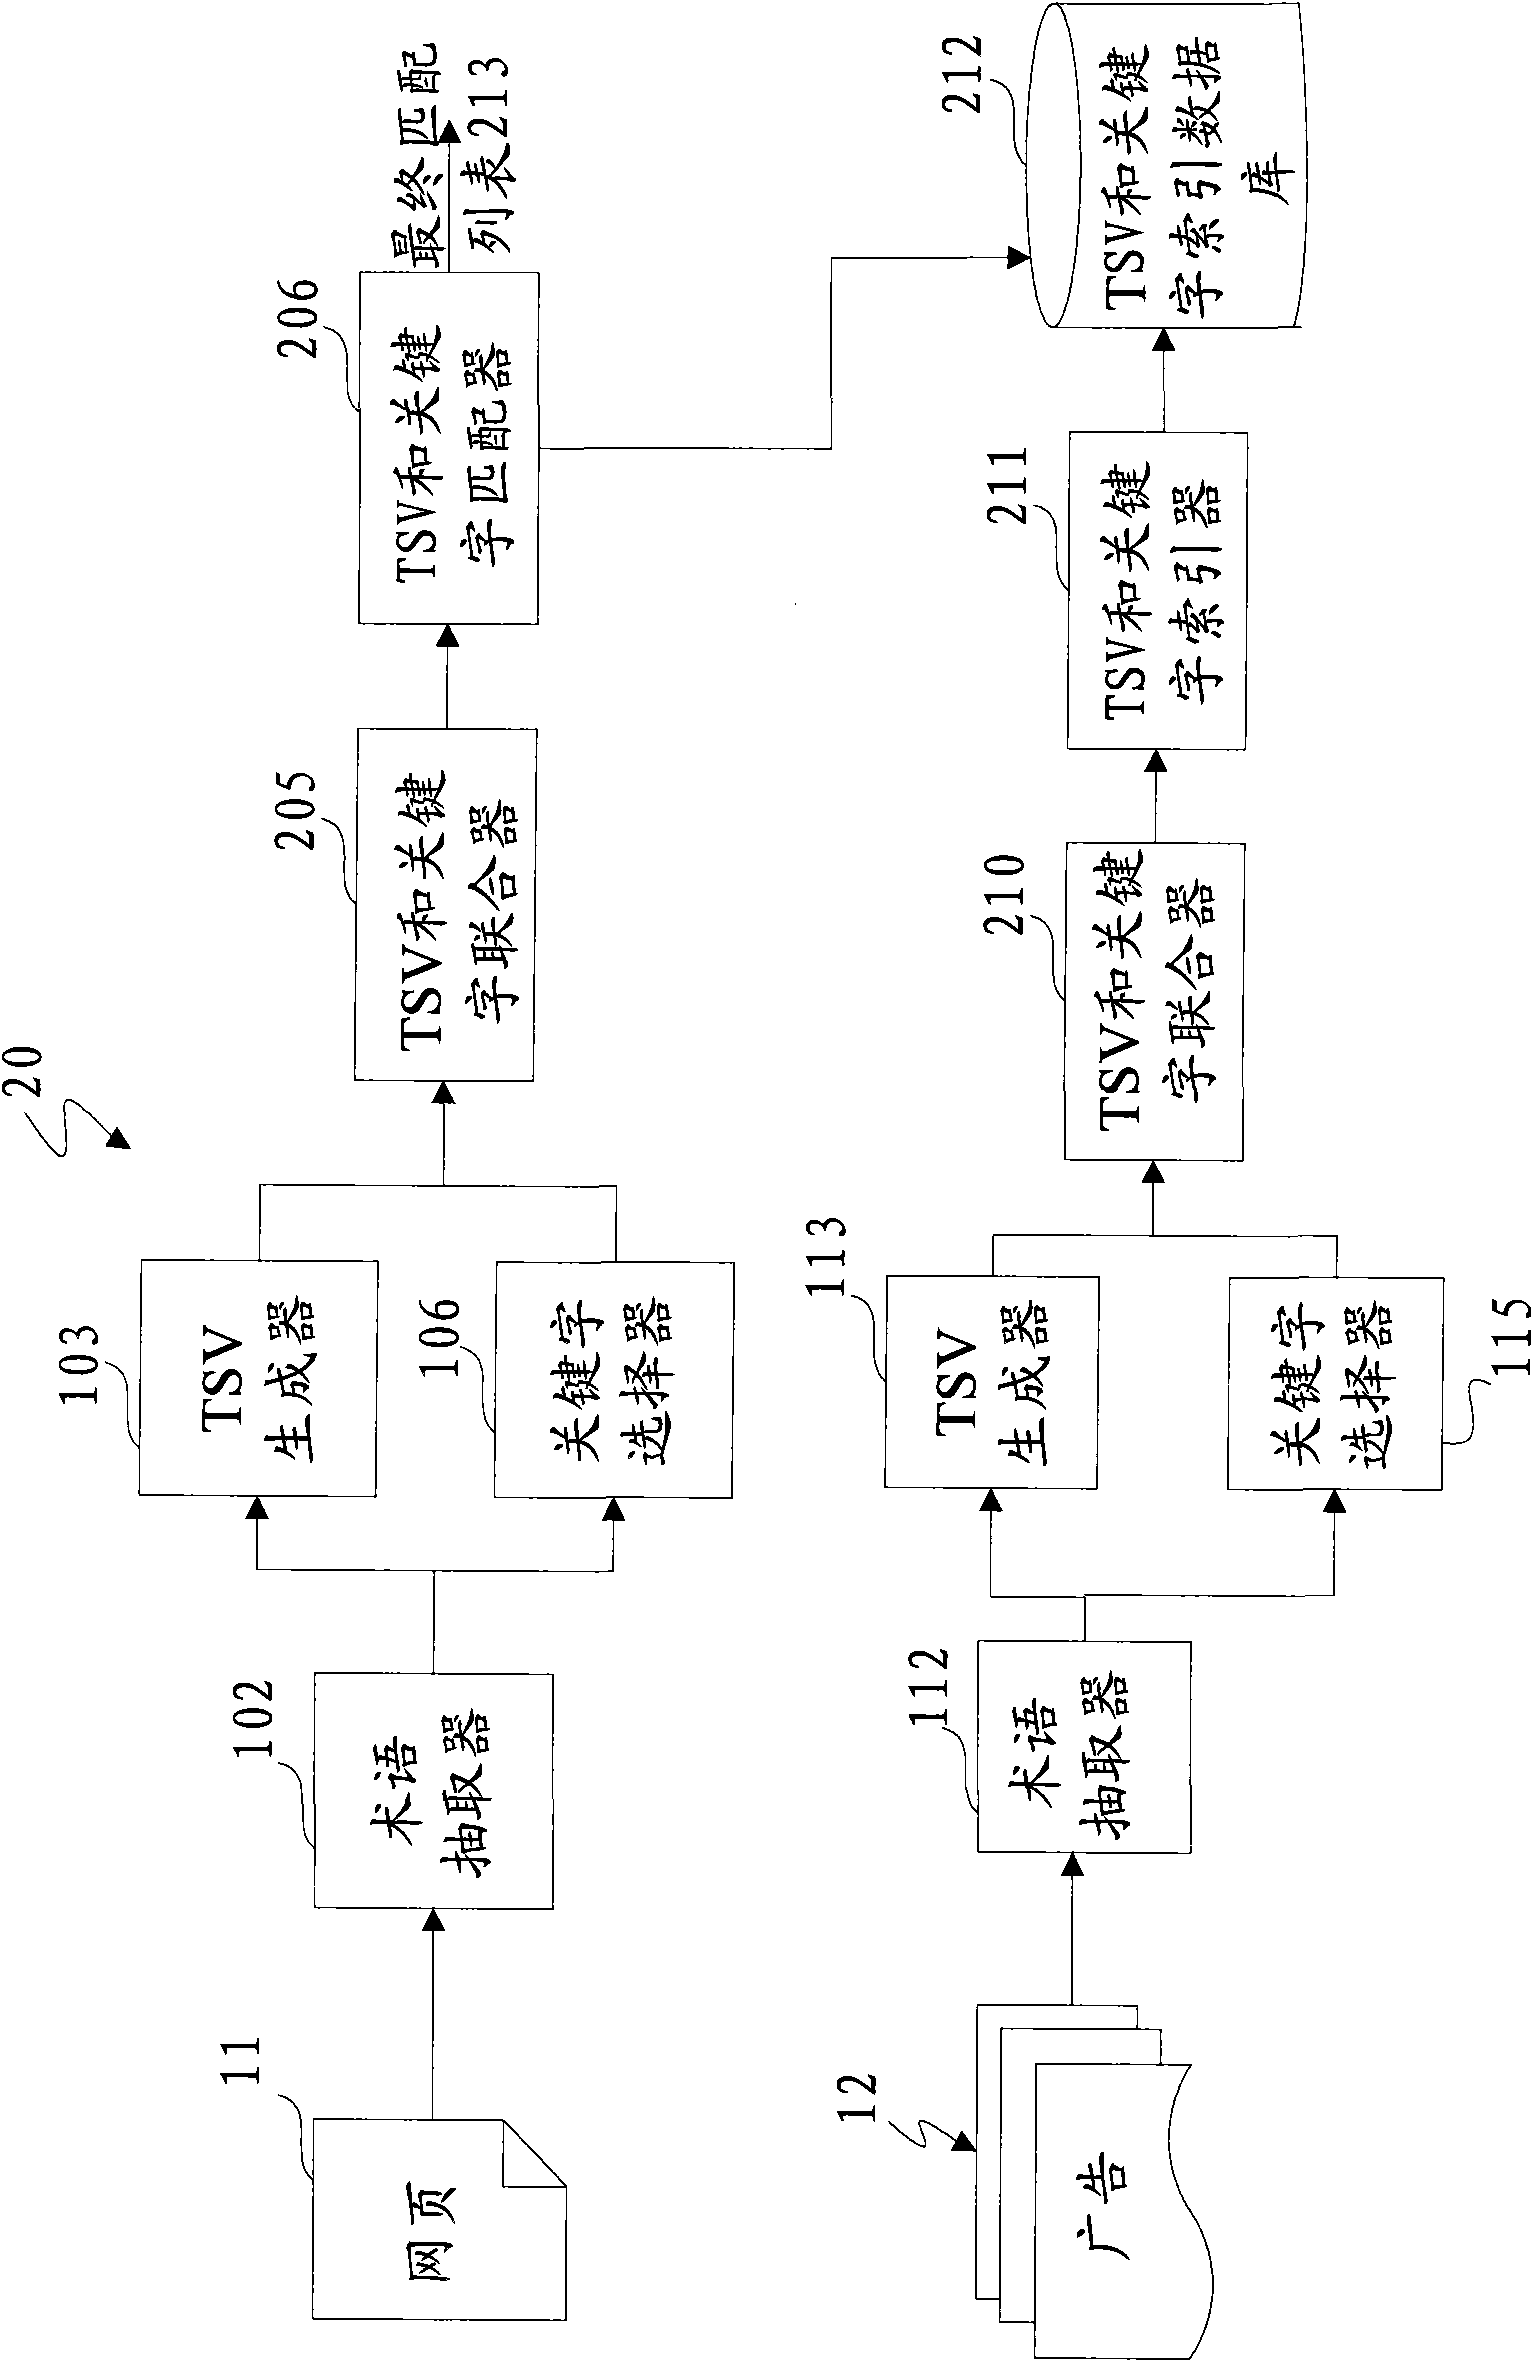 Method and apparatus for relating datasets by using semantic vectors and keyword analyses